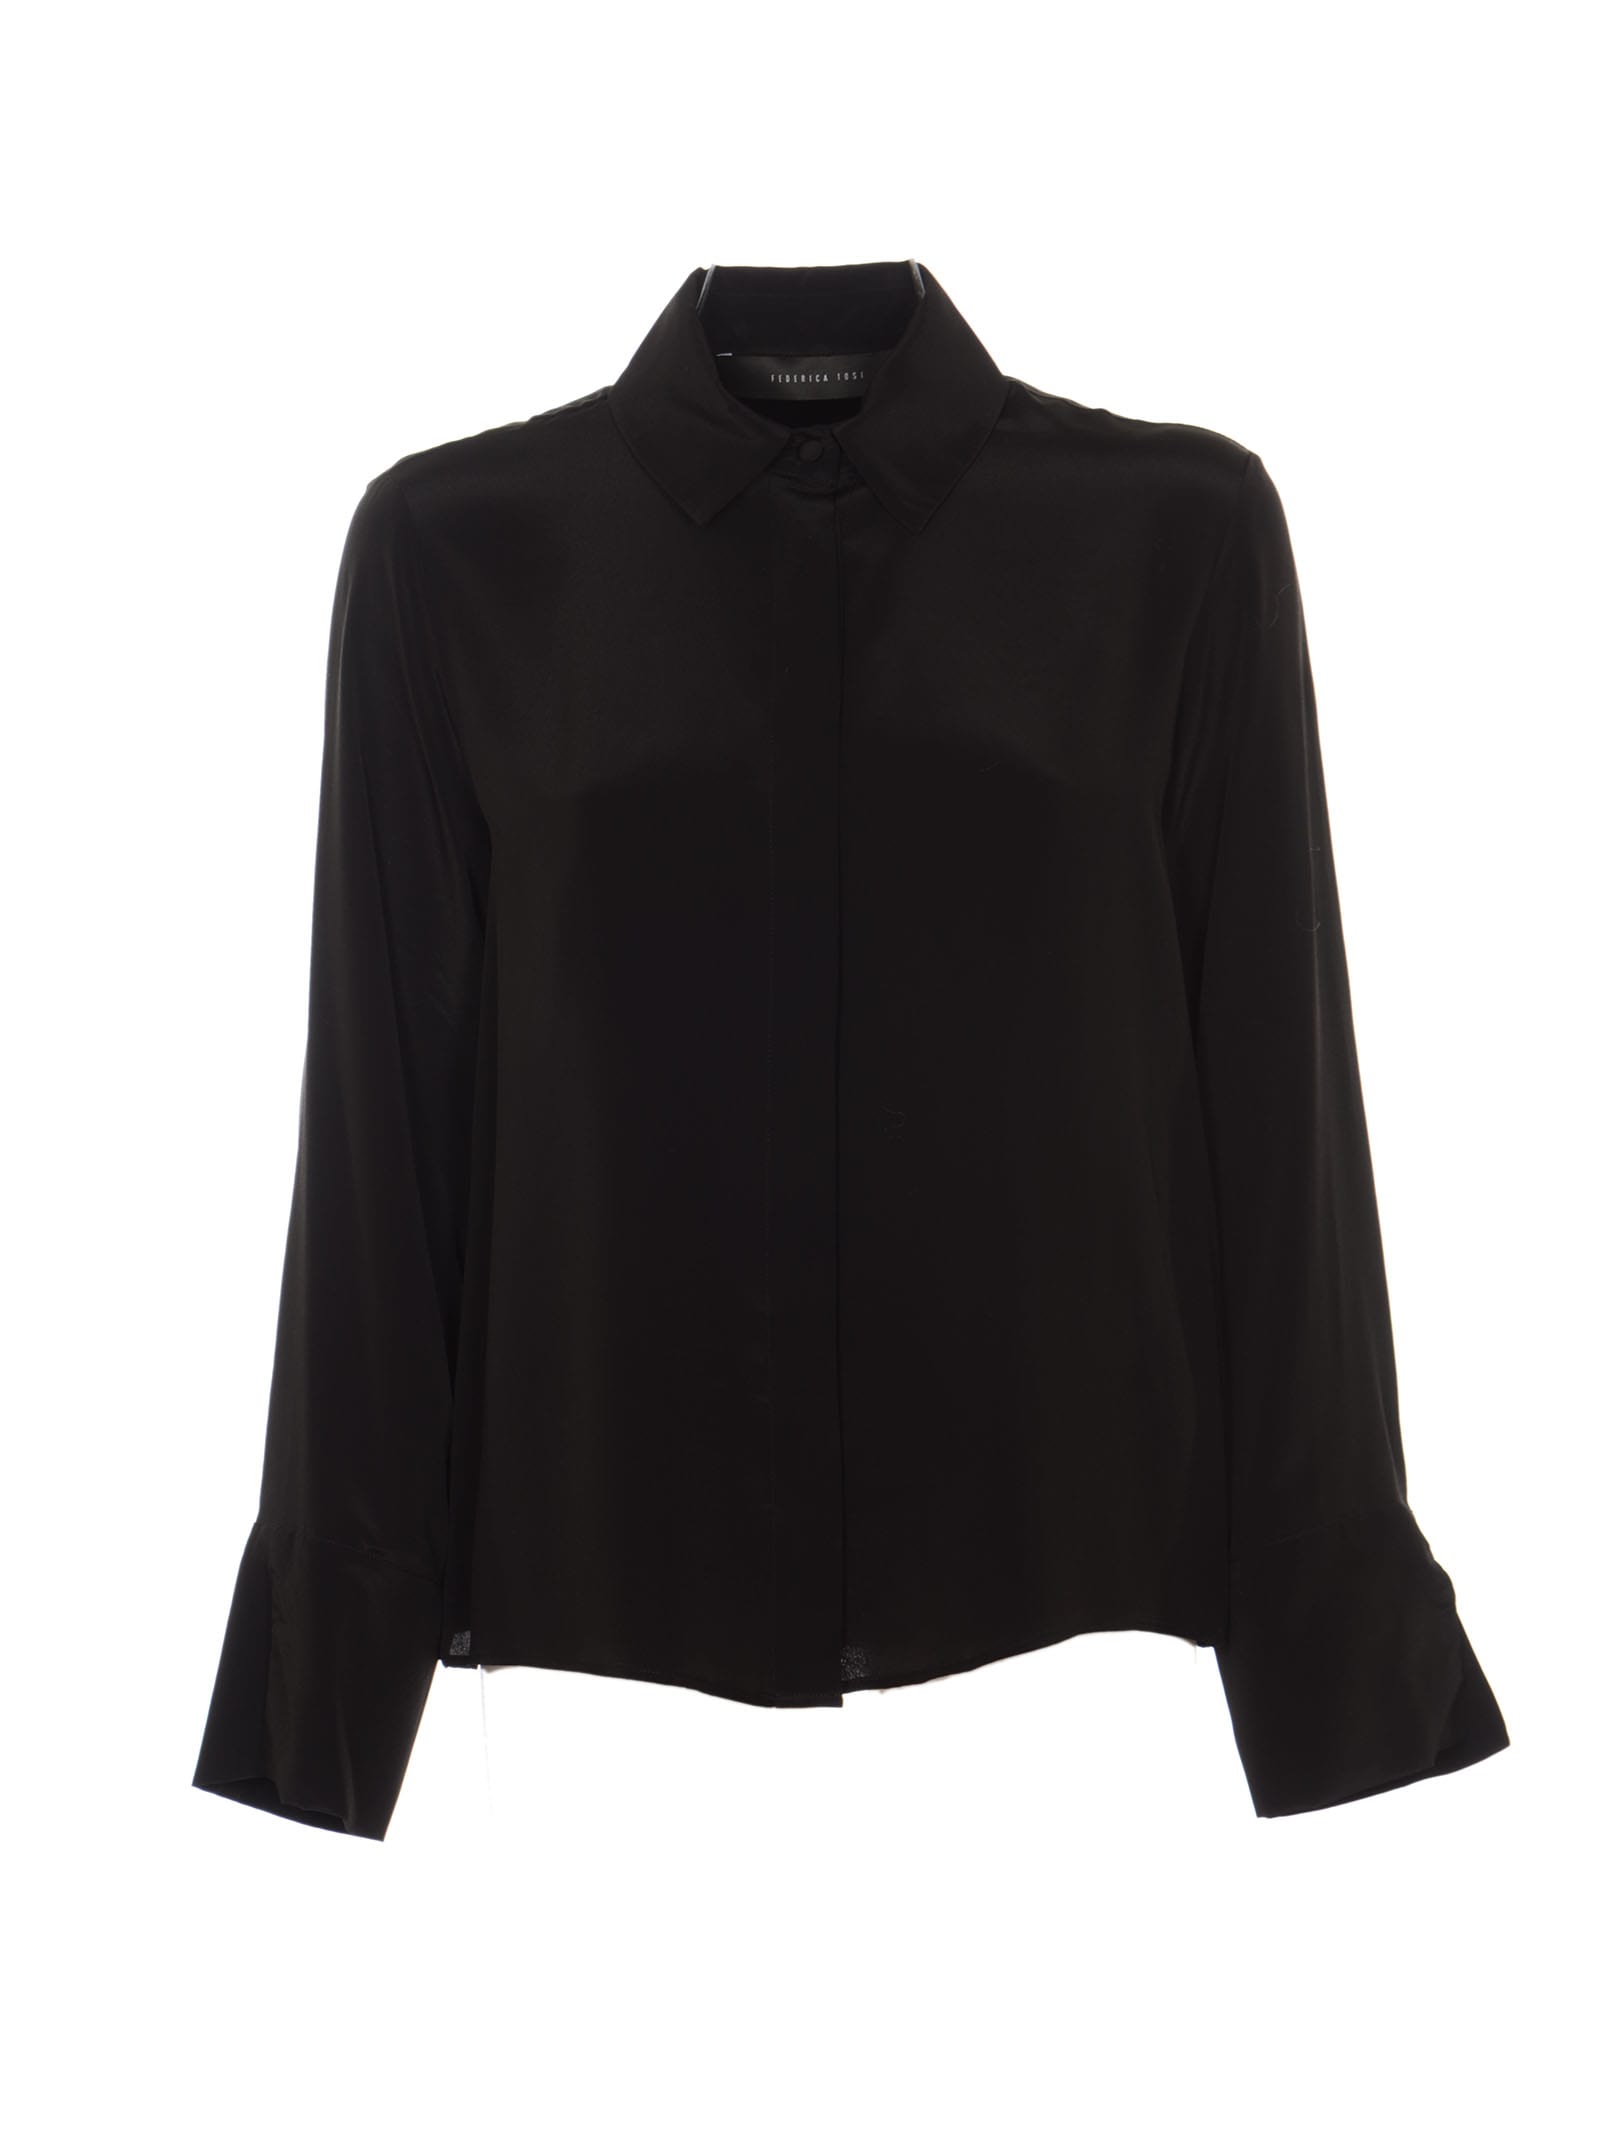 Federica Tosi Concealed Shirt